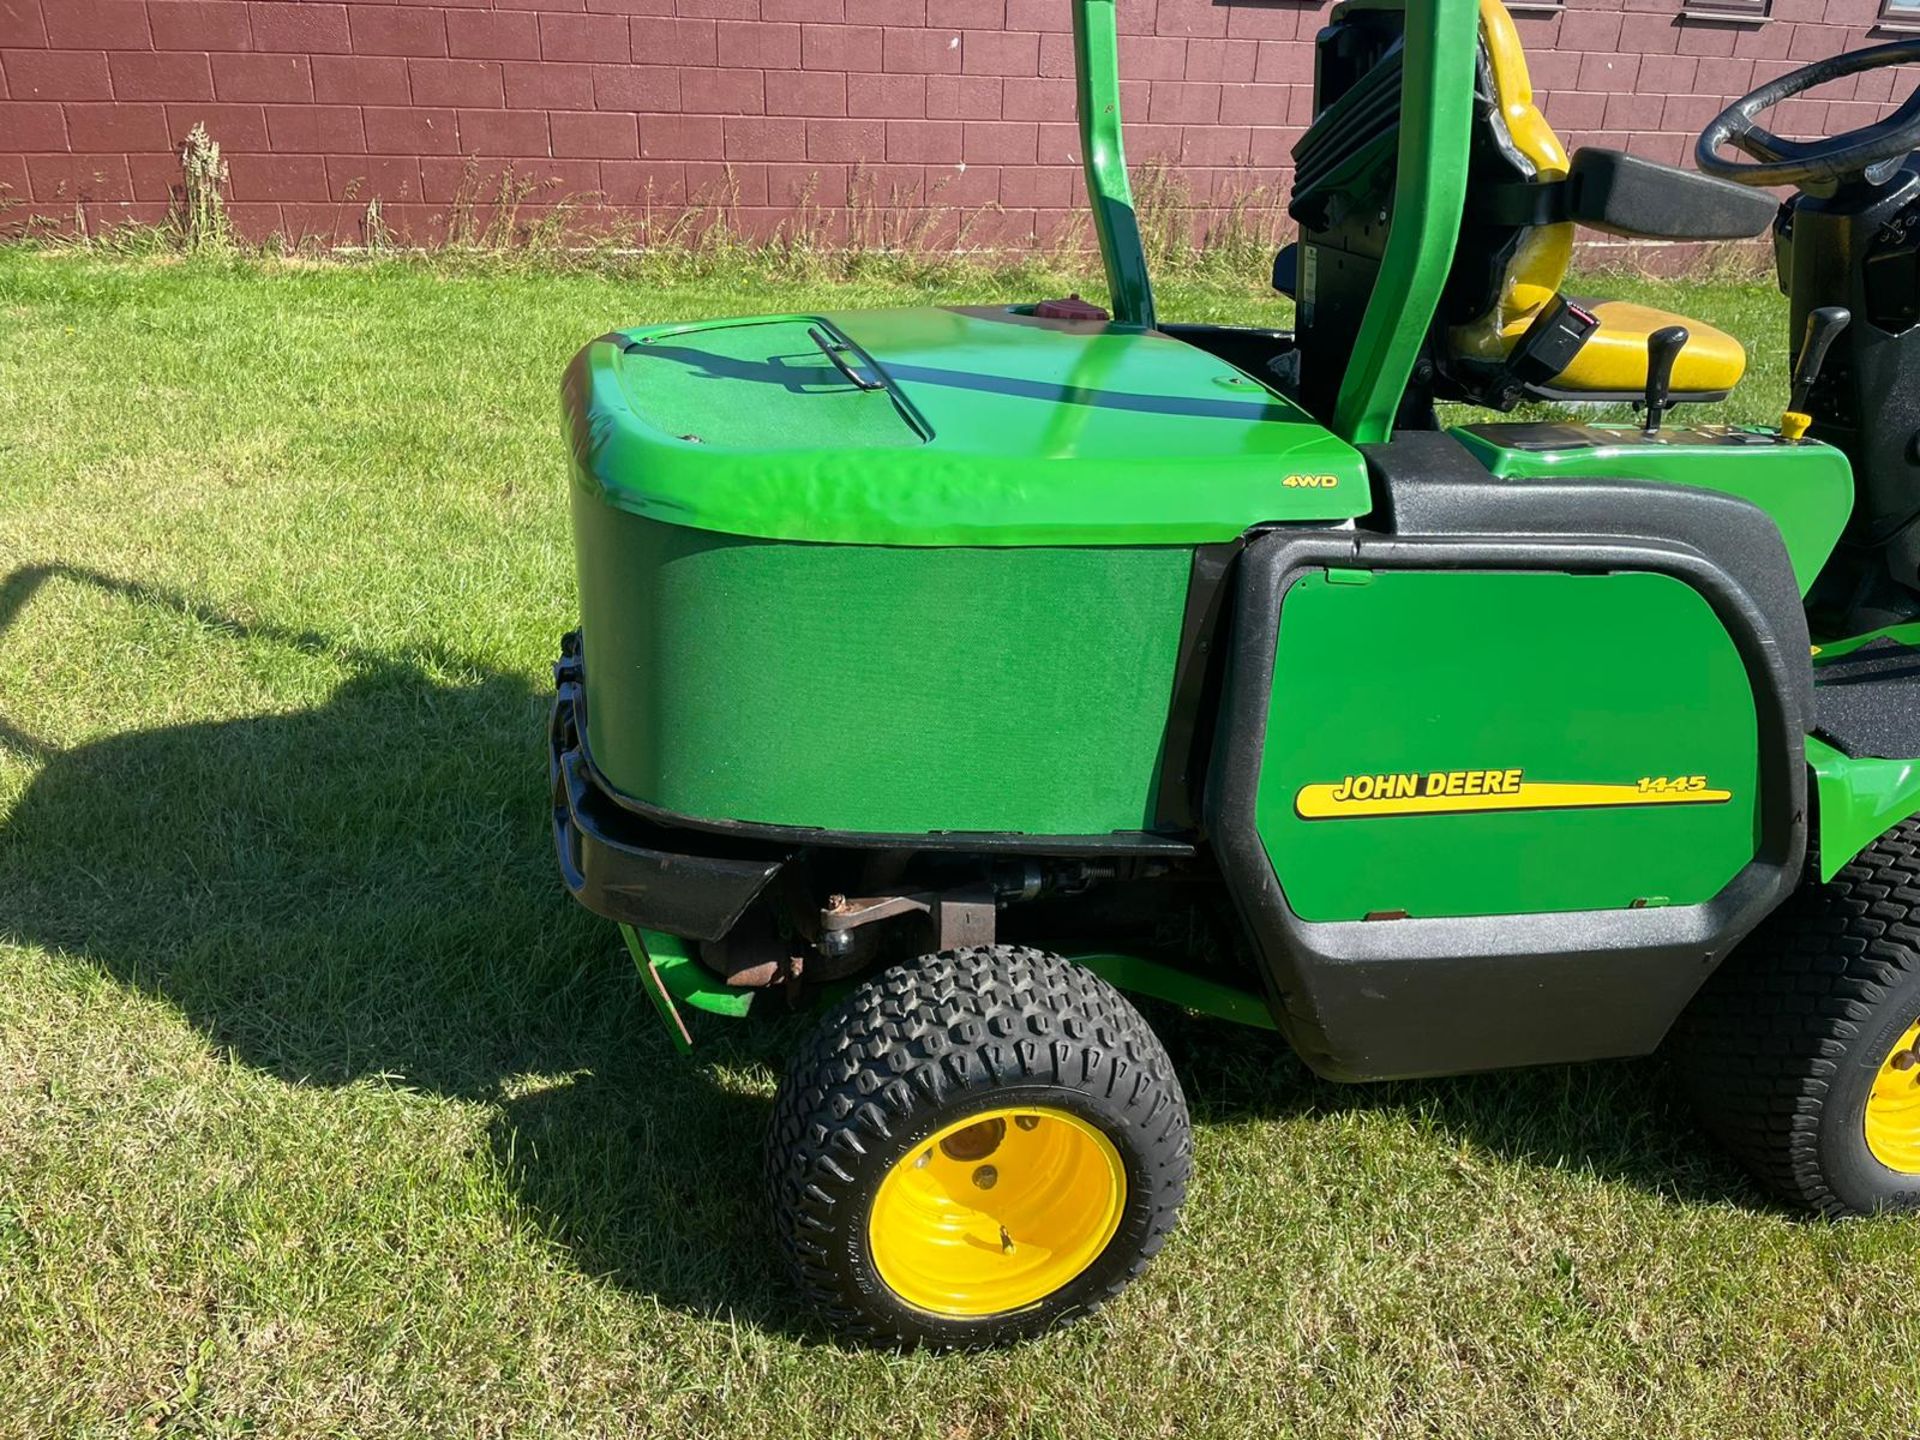 JOHN DEERE 1445 OUT FRONT RIDE ON LAWN MOWER *NO VAT* - Image 15 of 17